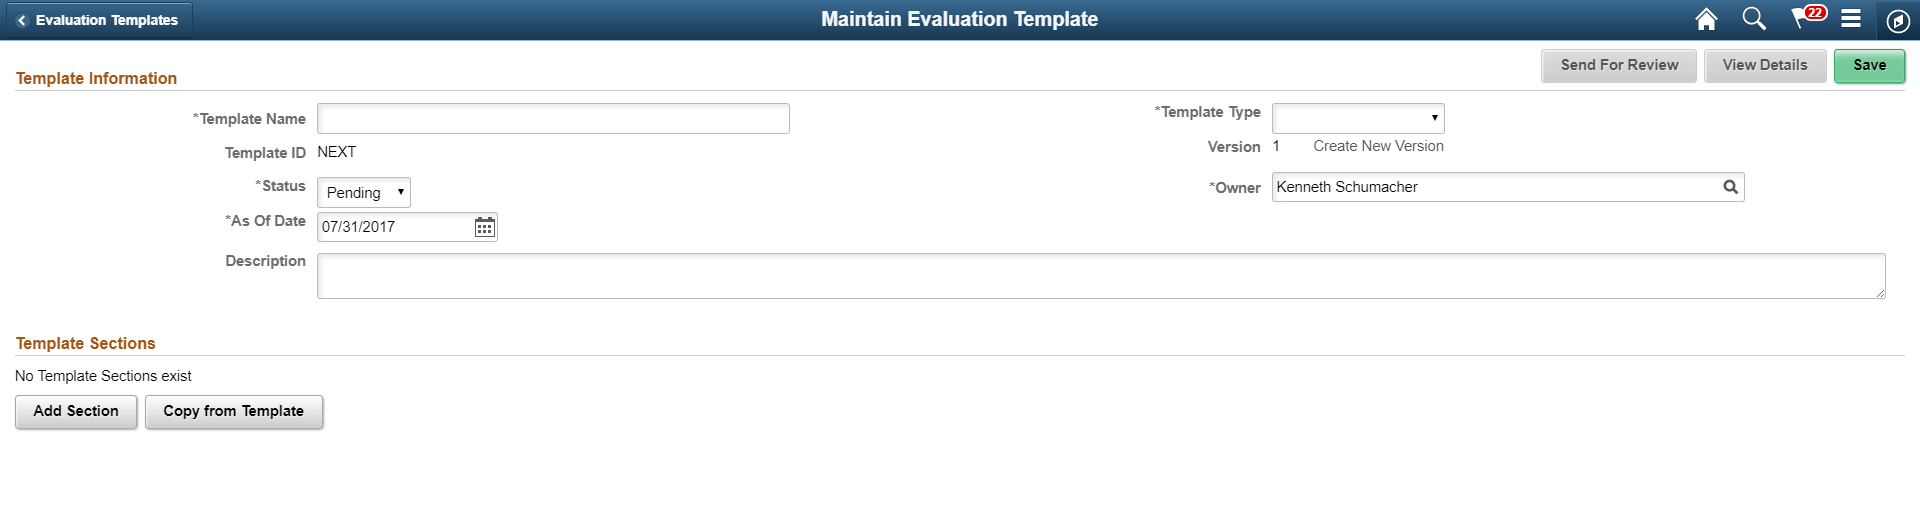 Maintain Evaluation Template page